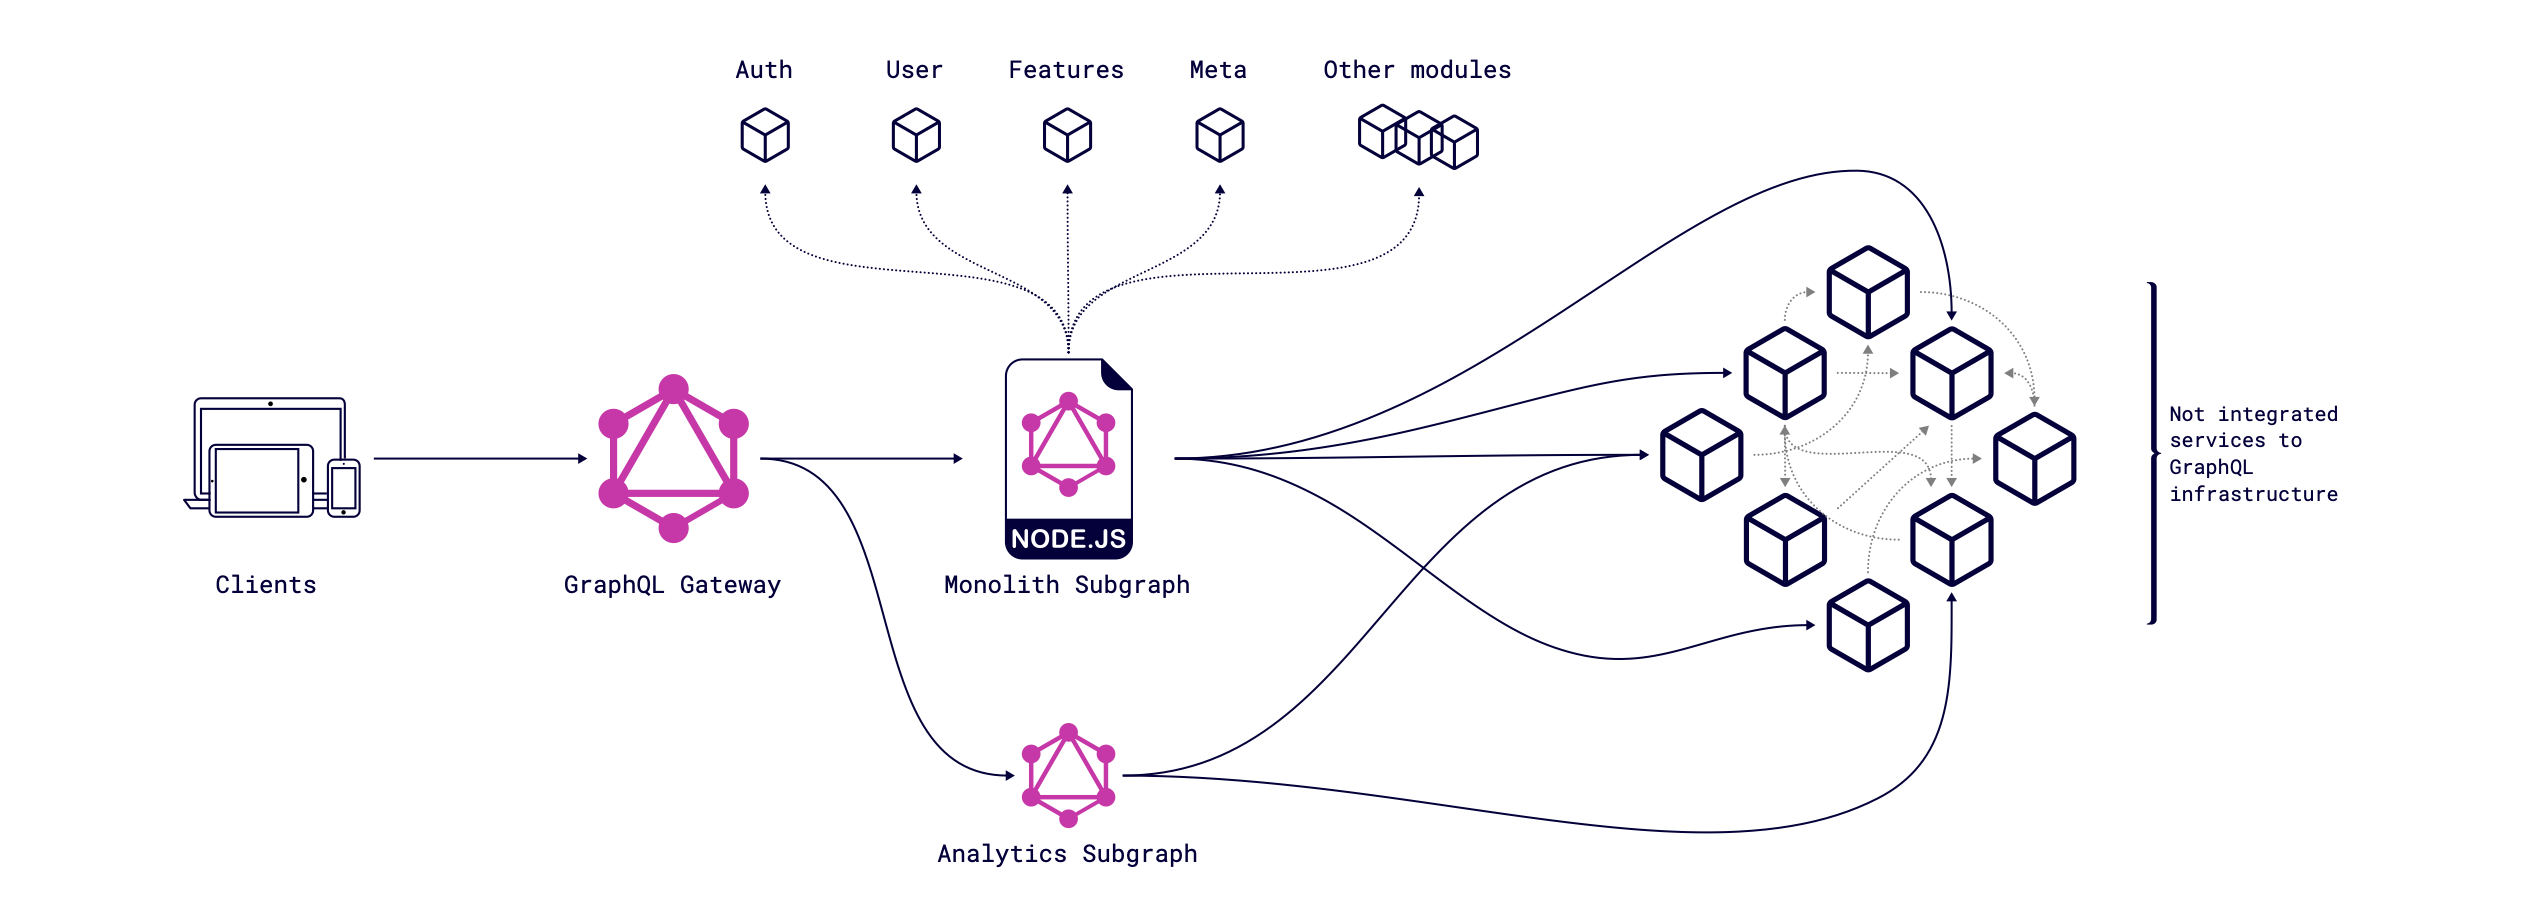 Mesh and introduce GraphQL to existing services